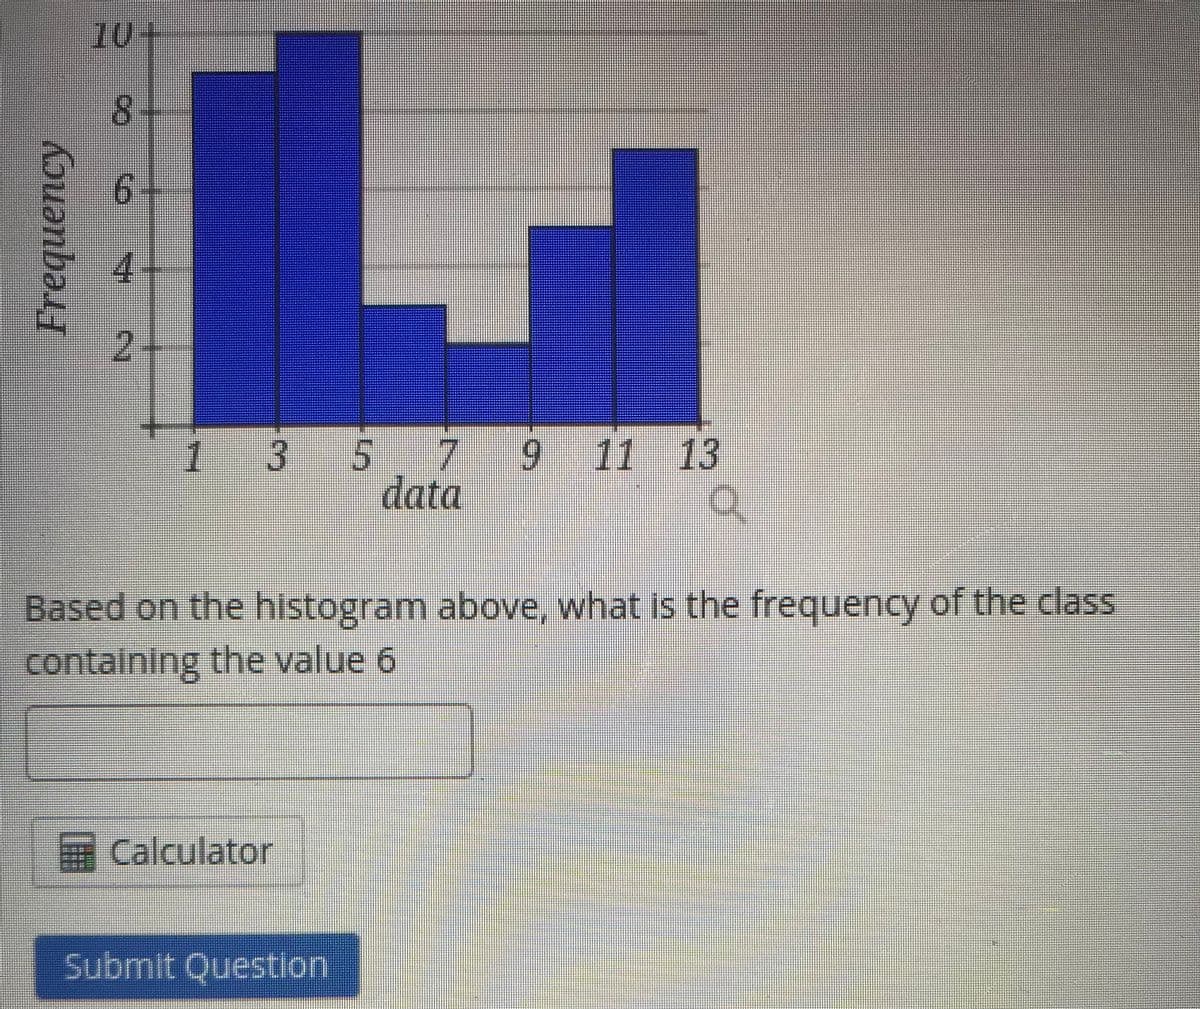 10+
8.
2.
7.
6.
11 13
9
data
1
3
Based on the histogram above, what Is the frequency of the class
containing the value 6
Calculator
Submit Question
